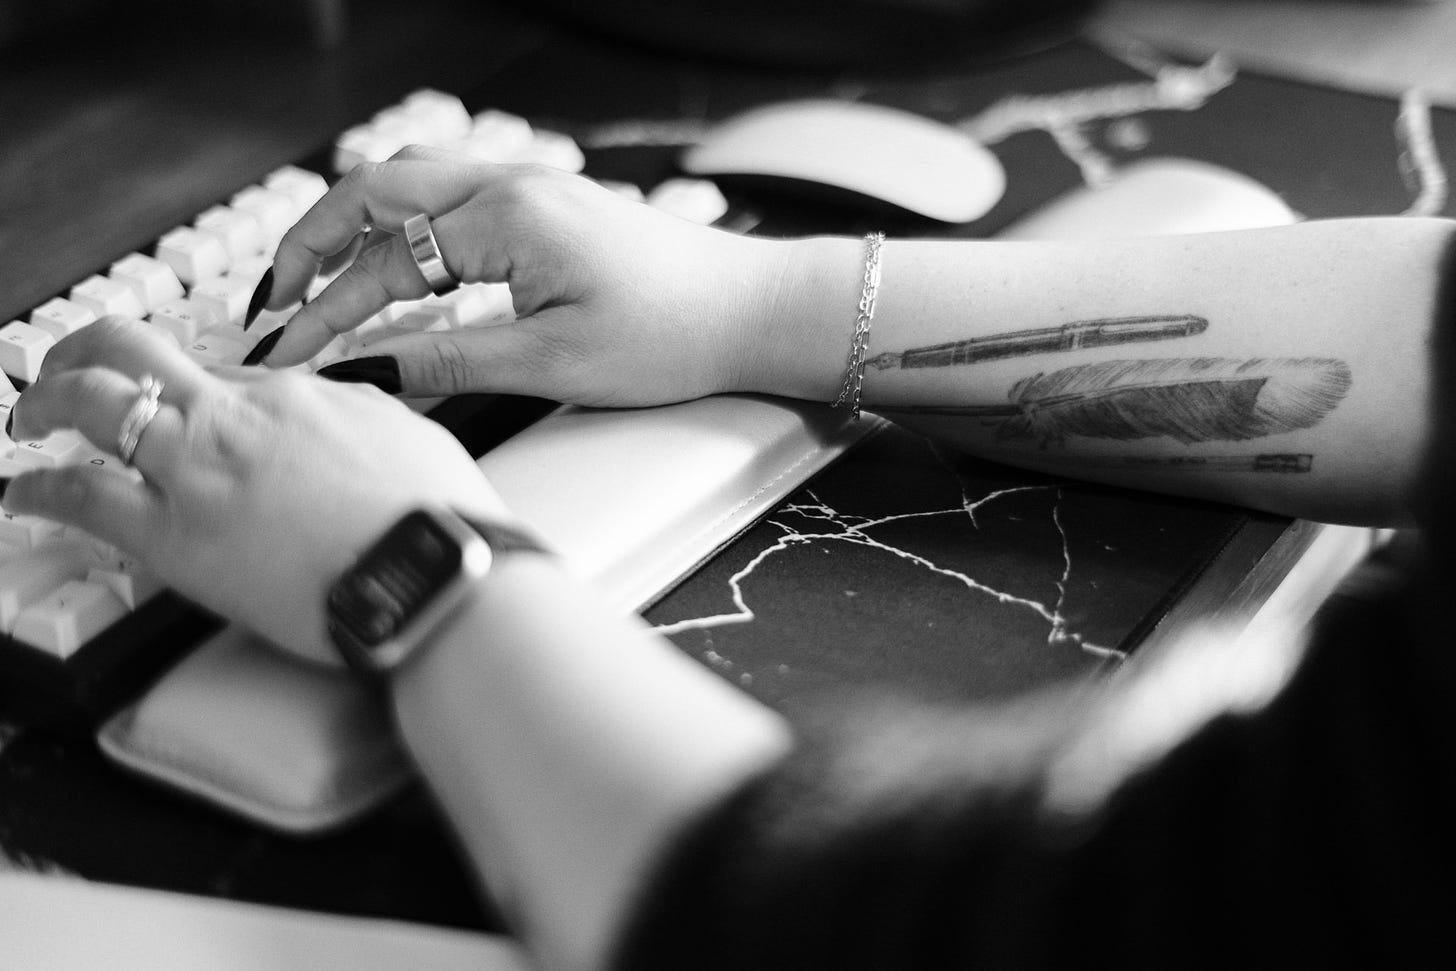 black and white photo of a woman's forearms as she types on a keyboard. she has long black nails and wears rings, bracelets, and an Apple Watch. she has a tattoo on her right forearm of a pen, feather quill, and pencil.